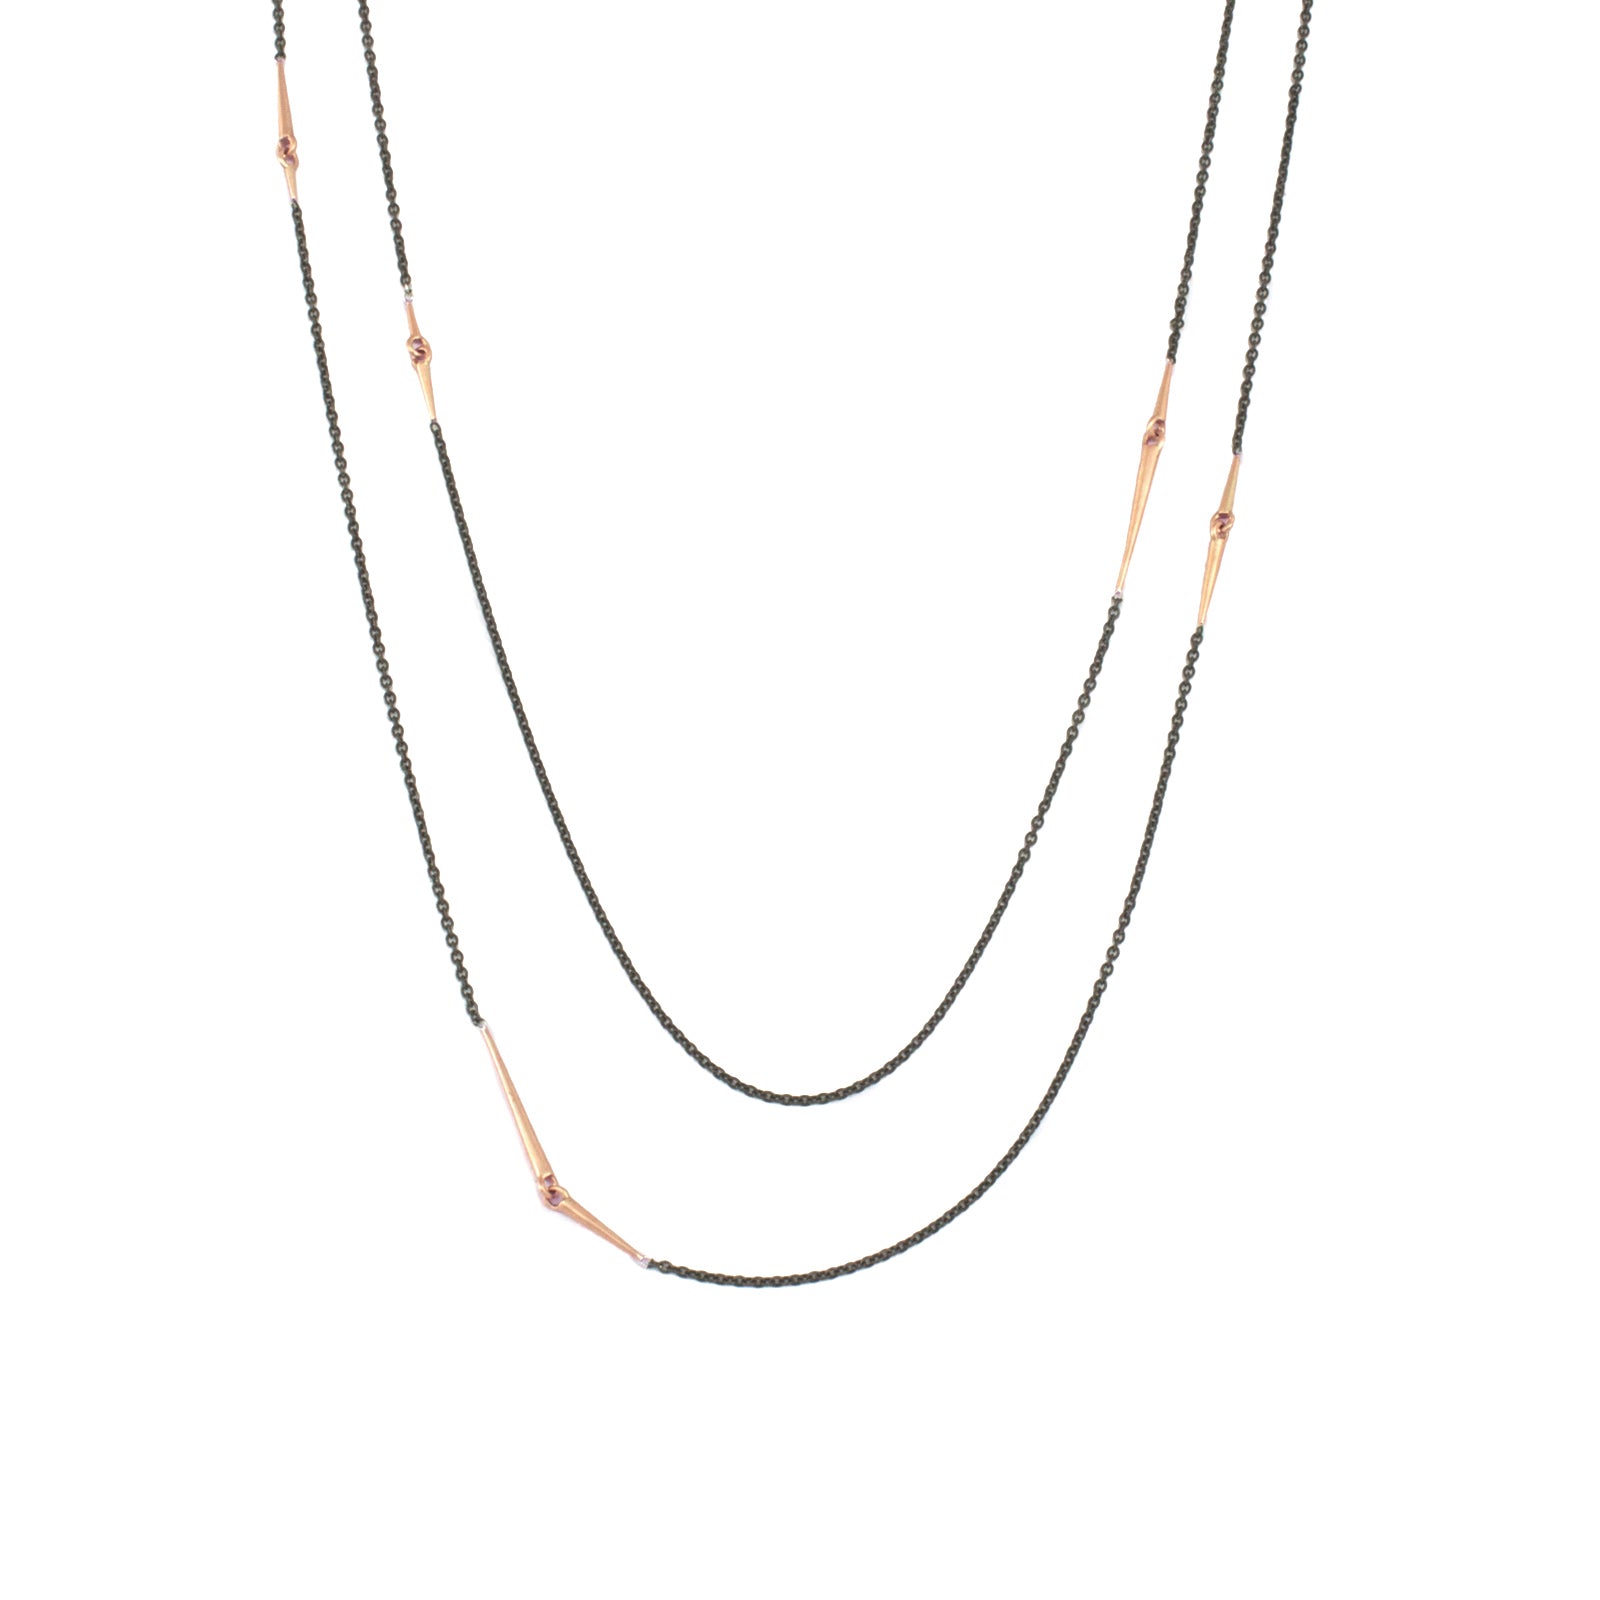 18k rose gold/oxidized silver long mirrored points necklace